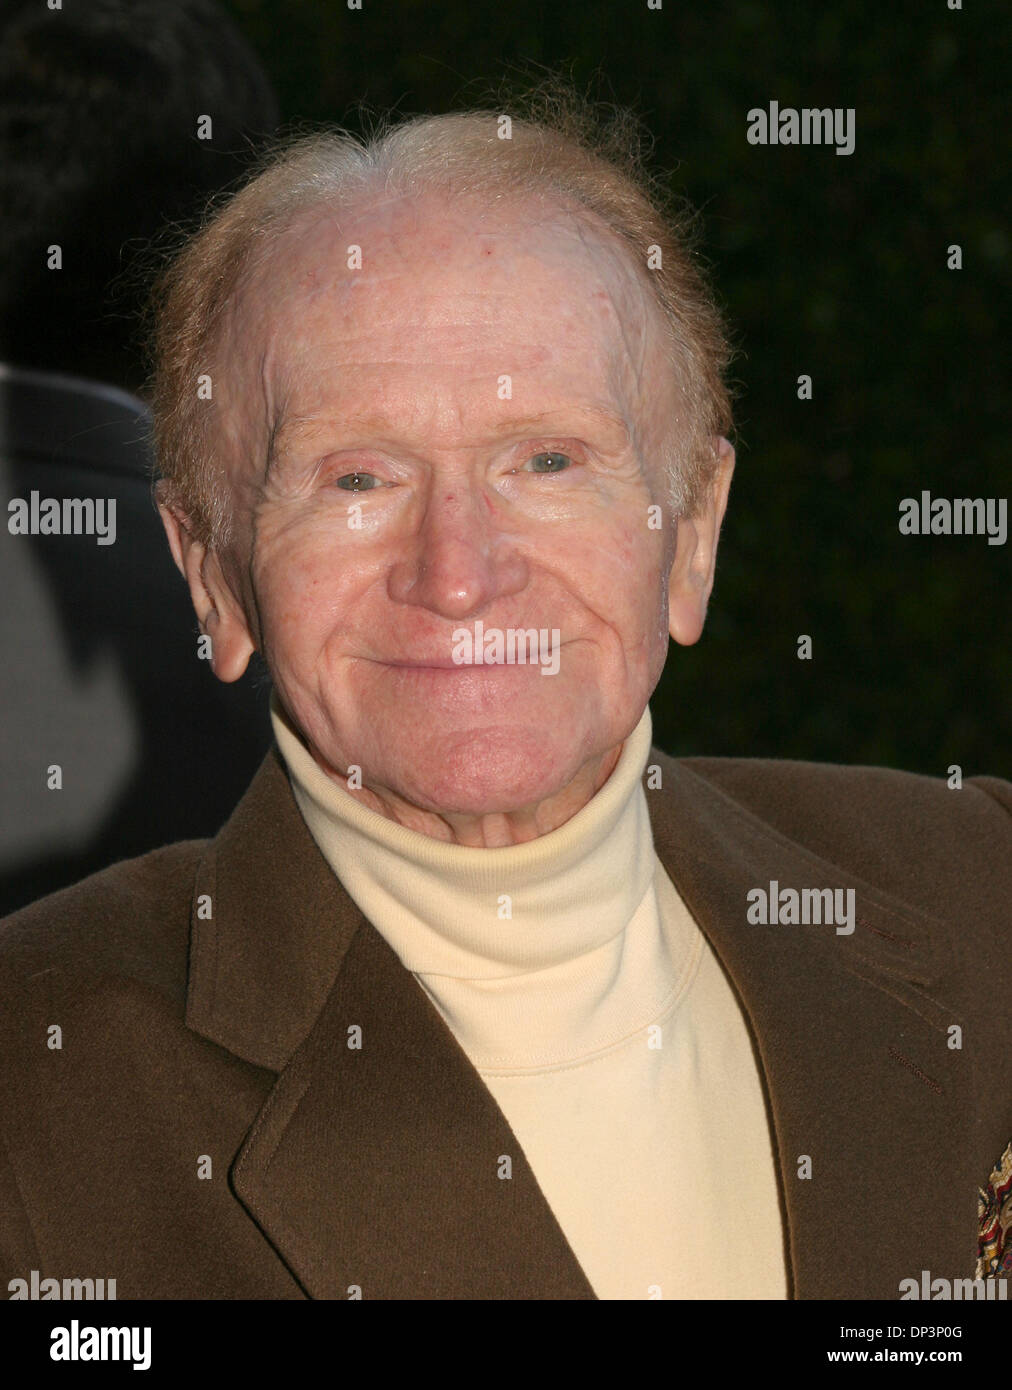 Jul 14, 2006; Los Angeles, California, USA; File photo Jul 14, 2005.  American comedian and actor RED BUTTONS has died at the age of 87. He died  of vascular disease at his